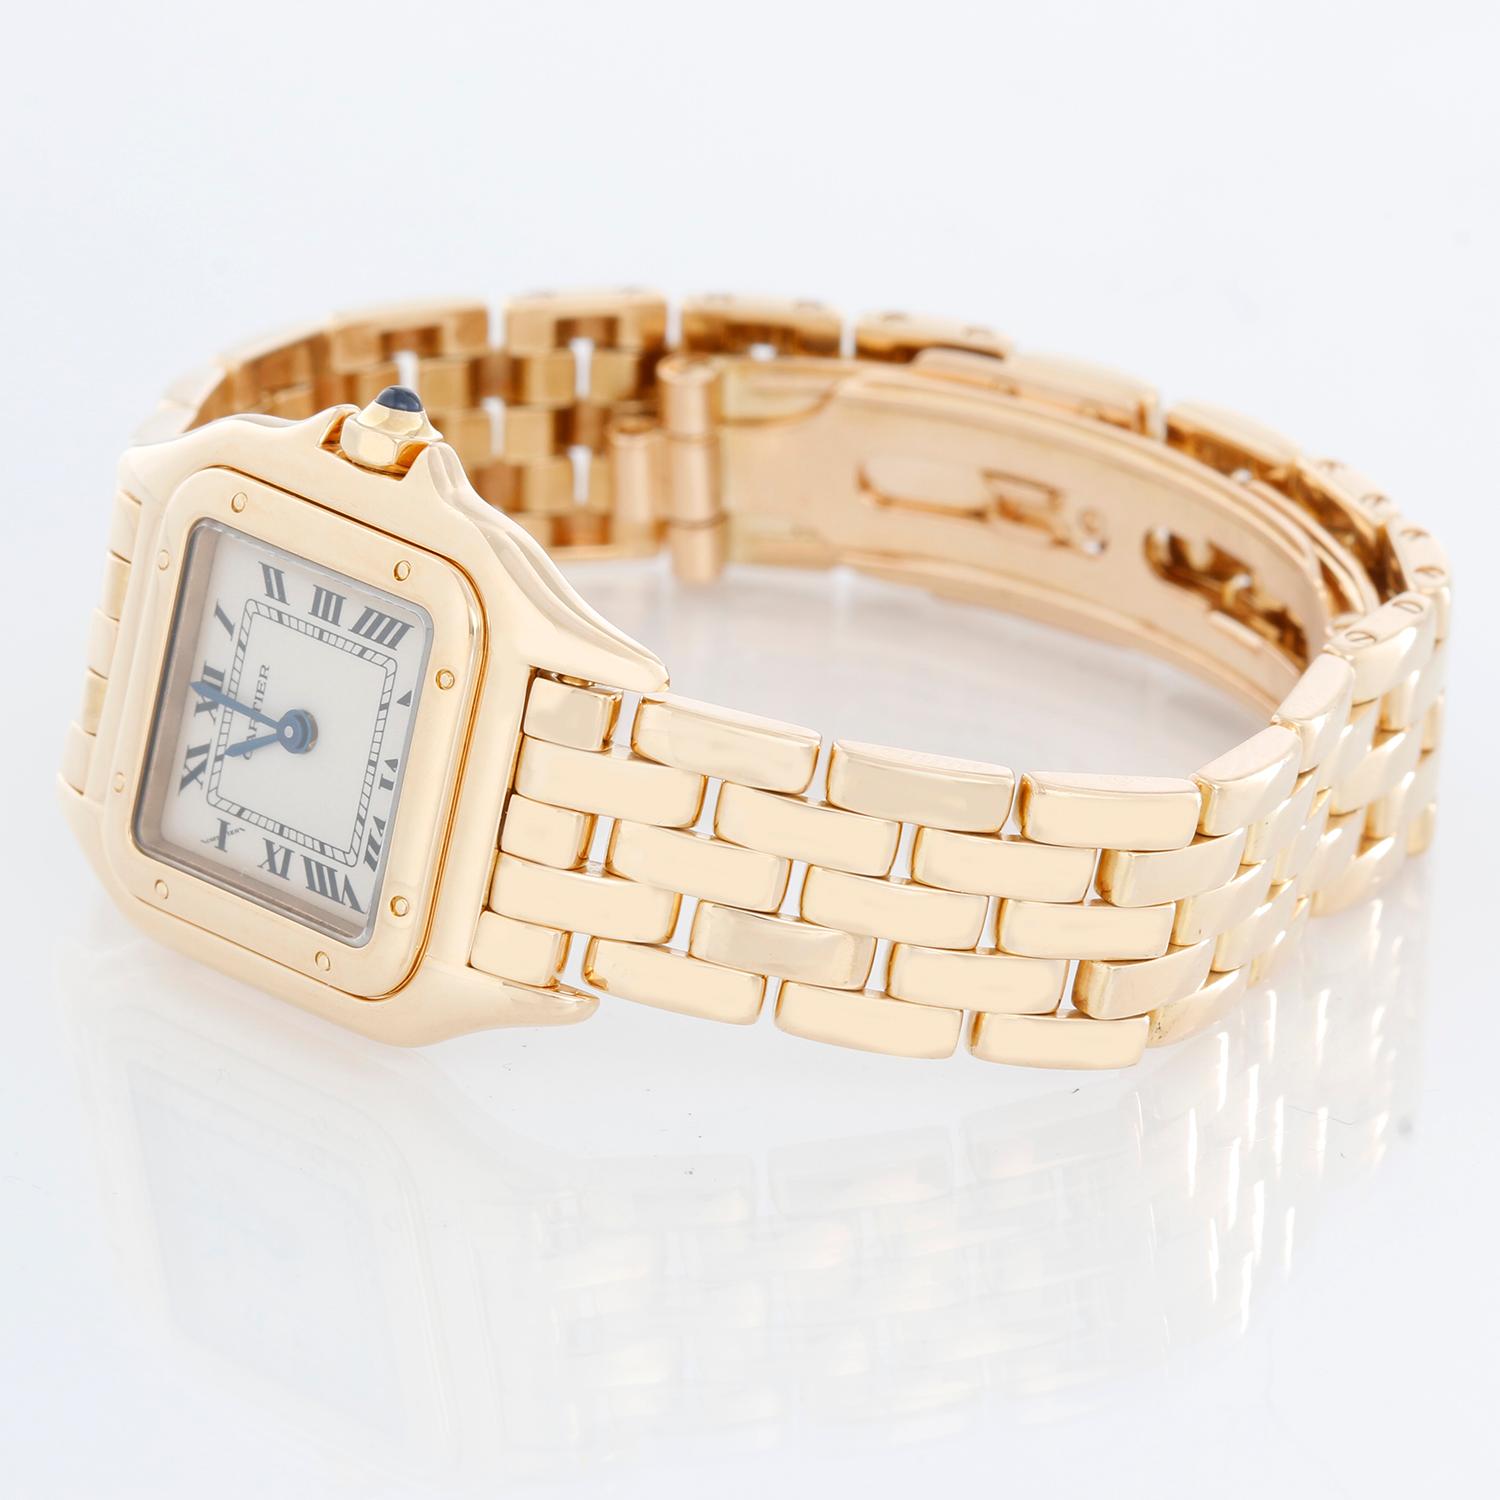 Cartier Panther Ladies 18k Yellow Gold Watch - Quartz. 18k yellow gold case (22mm x 30mm ). Ivory colored dial with black Roman numerals. 18k yellow gold Panther bracelet. Pre-owned with custom box .